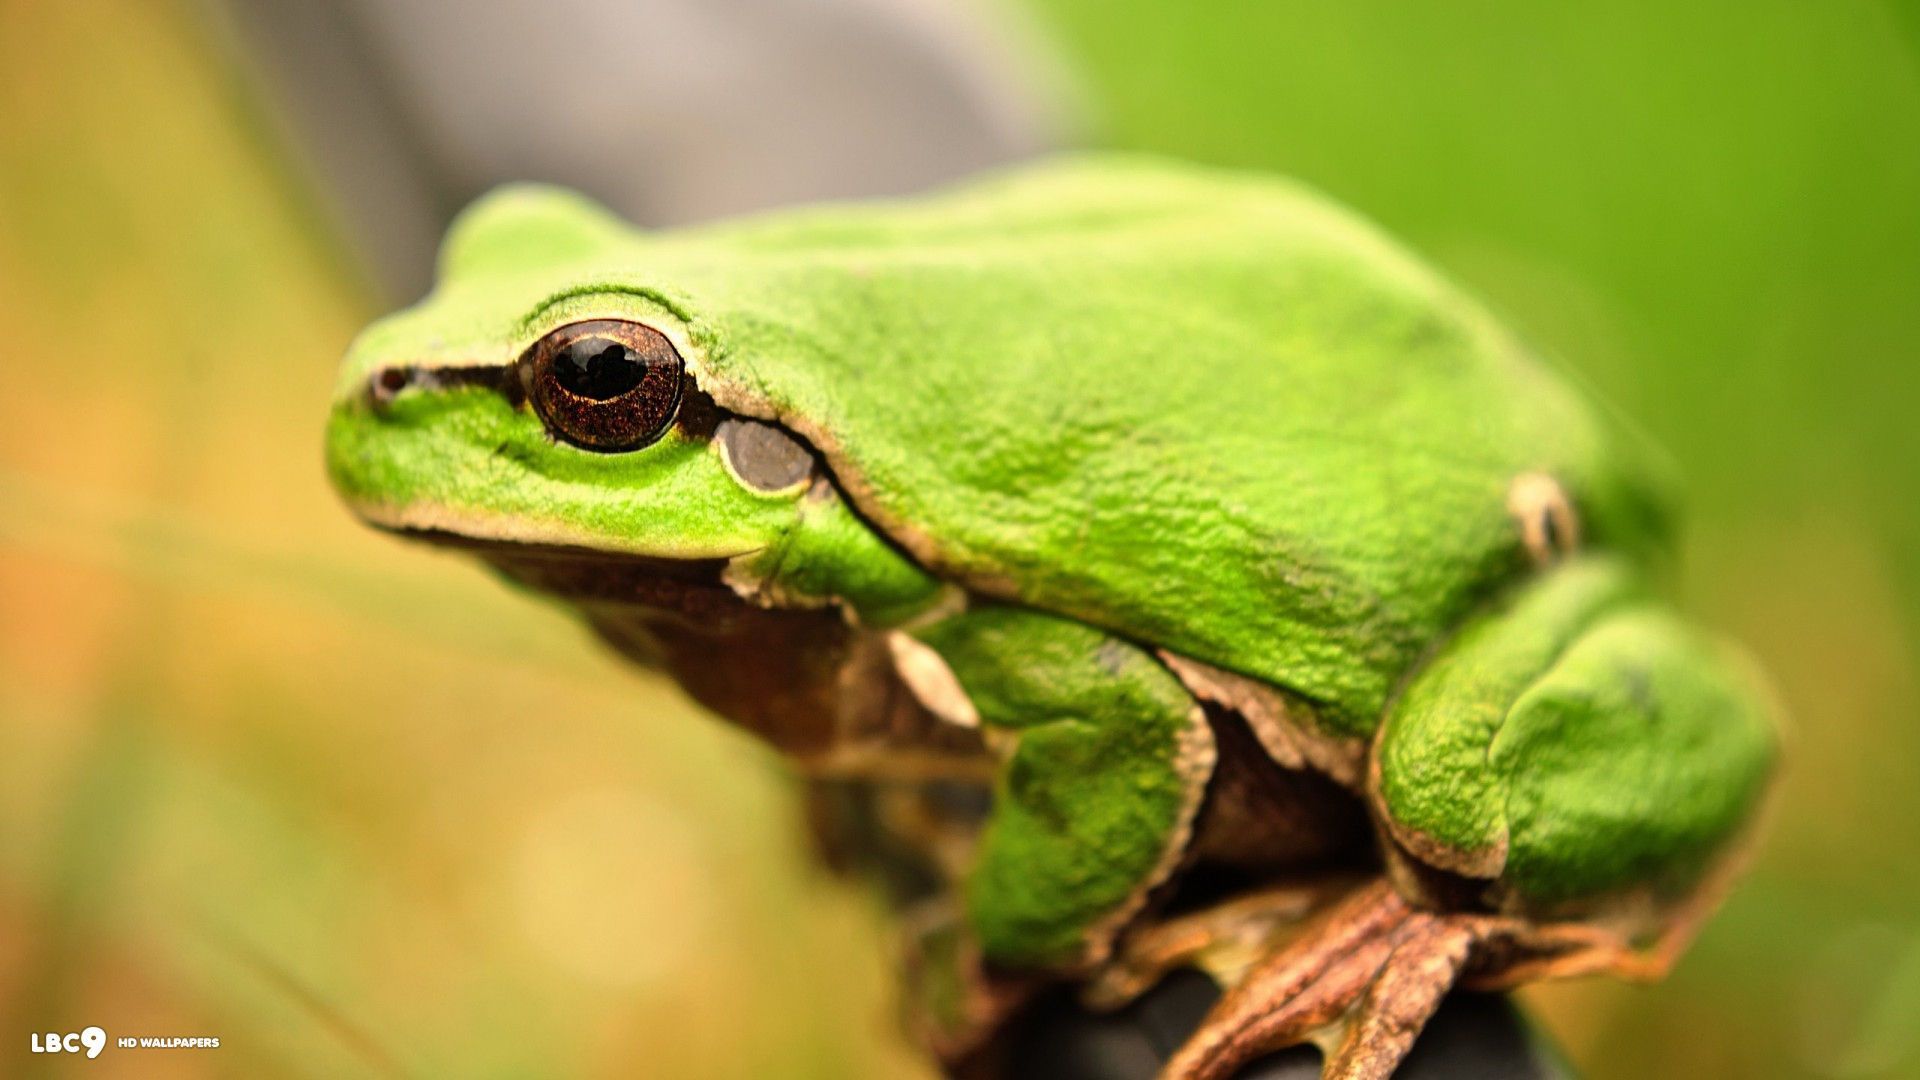 1920x1080 Frog Wallpaper 1 86 Reptiles And Amphibians Hd Background Frog Wallpaper Frog Animals